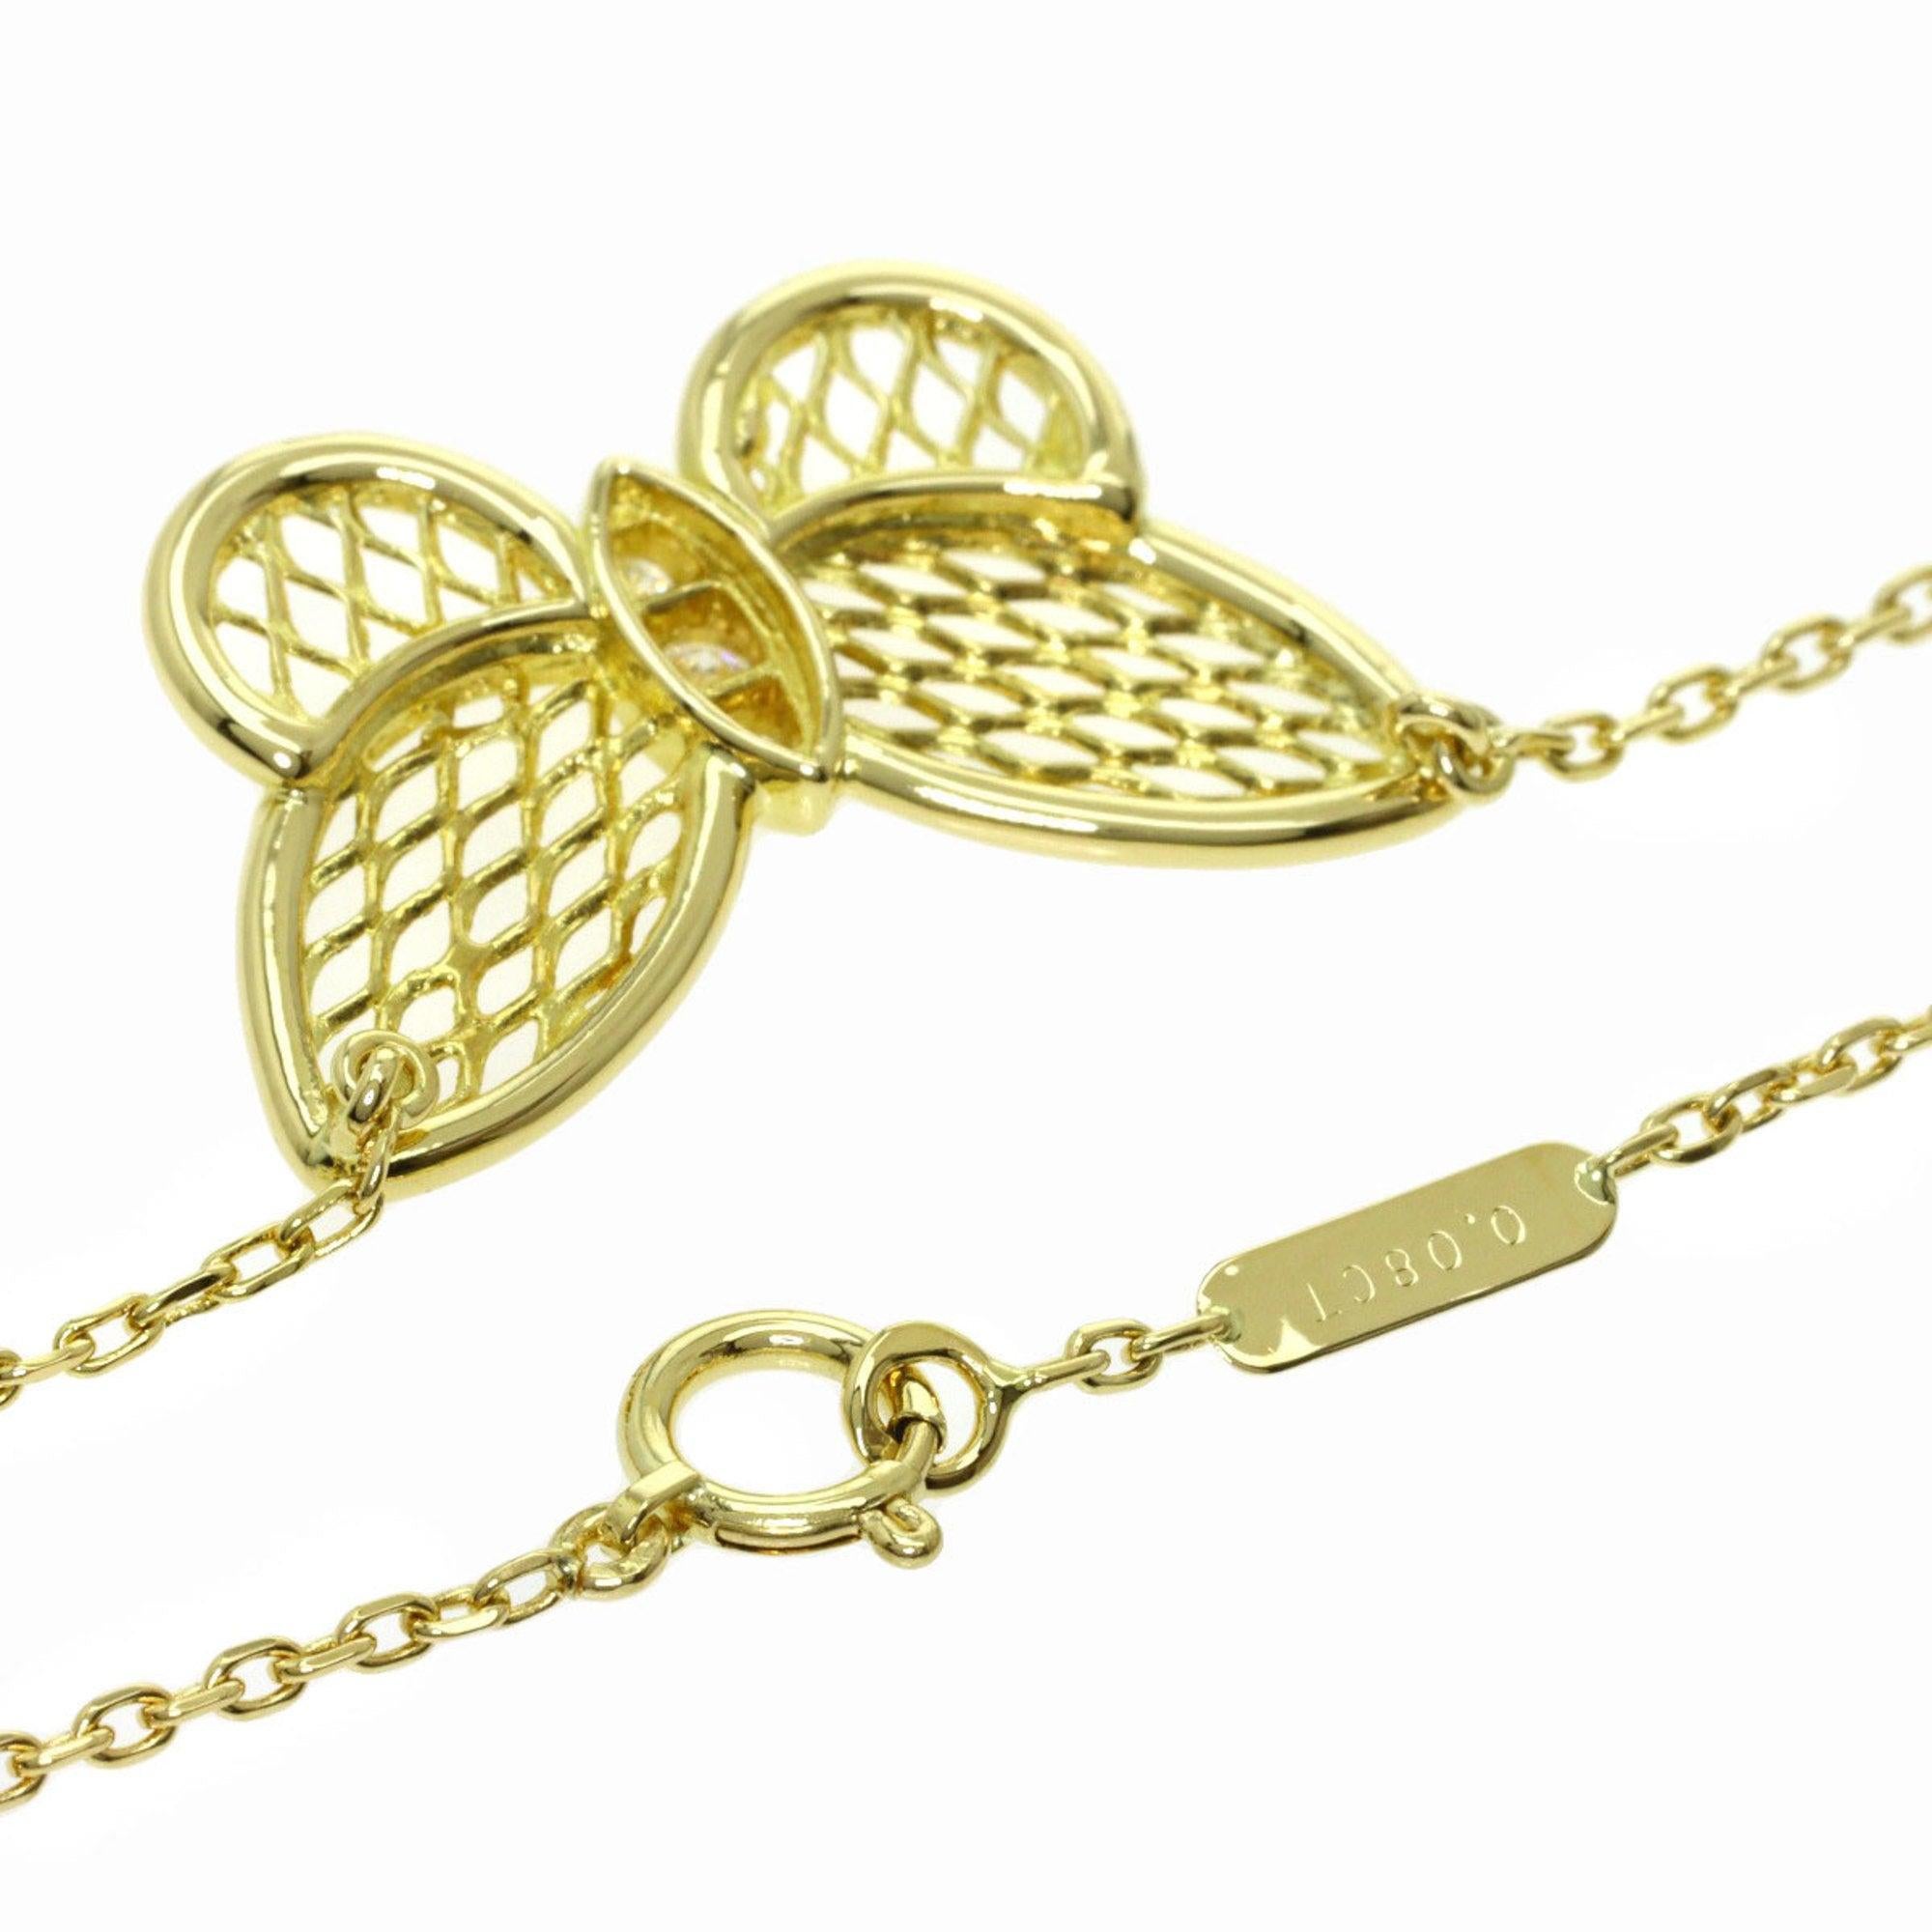 Van Cleef & Arpels Papillon Diamond Necklace in 18K Yellow Gold

Additional information:
Brand: Van Cleef & Arpels
Gemstone: Diamond
Material: Yellow gold (18K)
Condition: Good
Condition details: The item has been used and has some minor